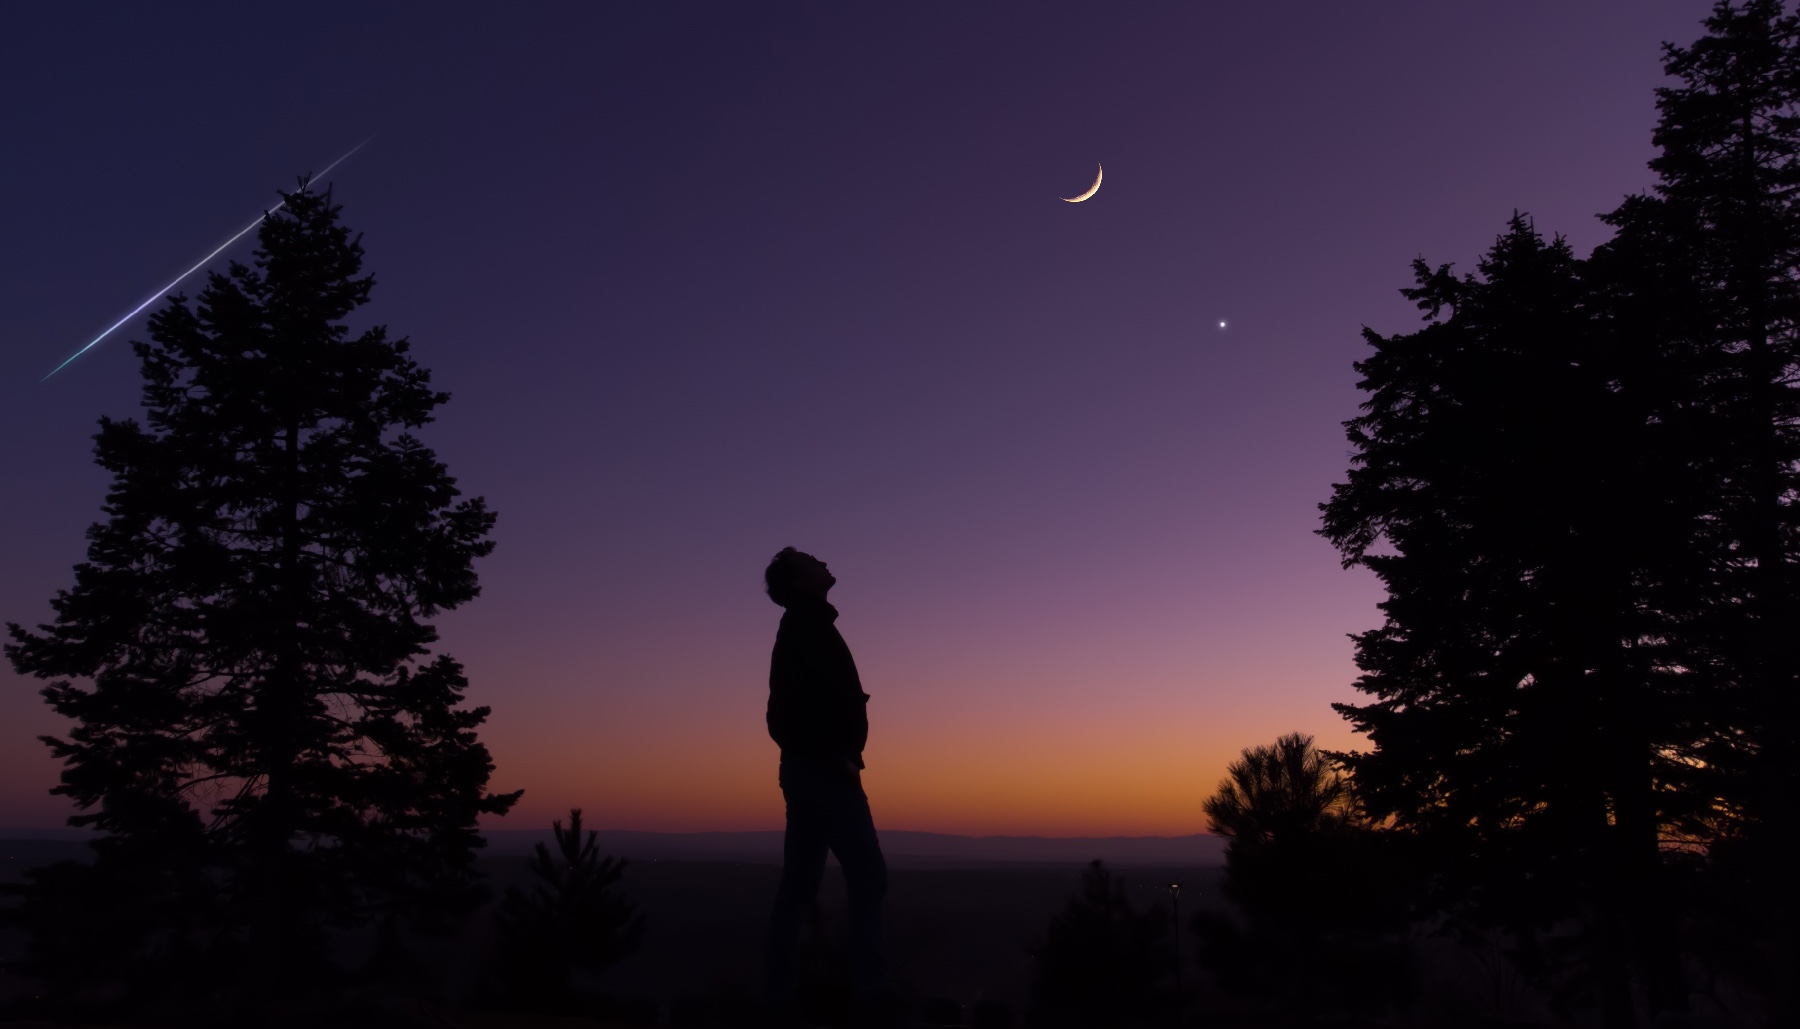 a silhouette figure looking up at a new moon